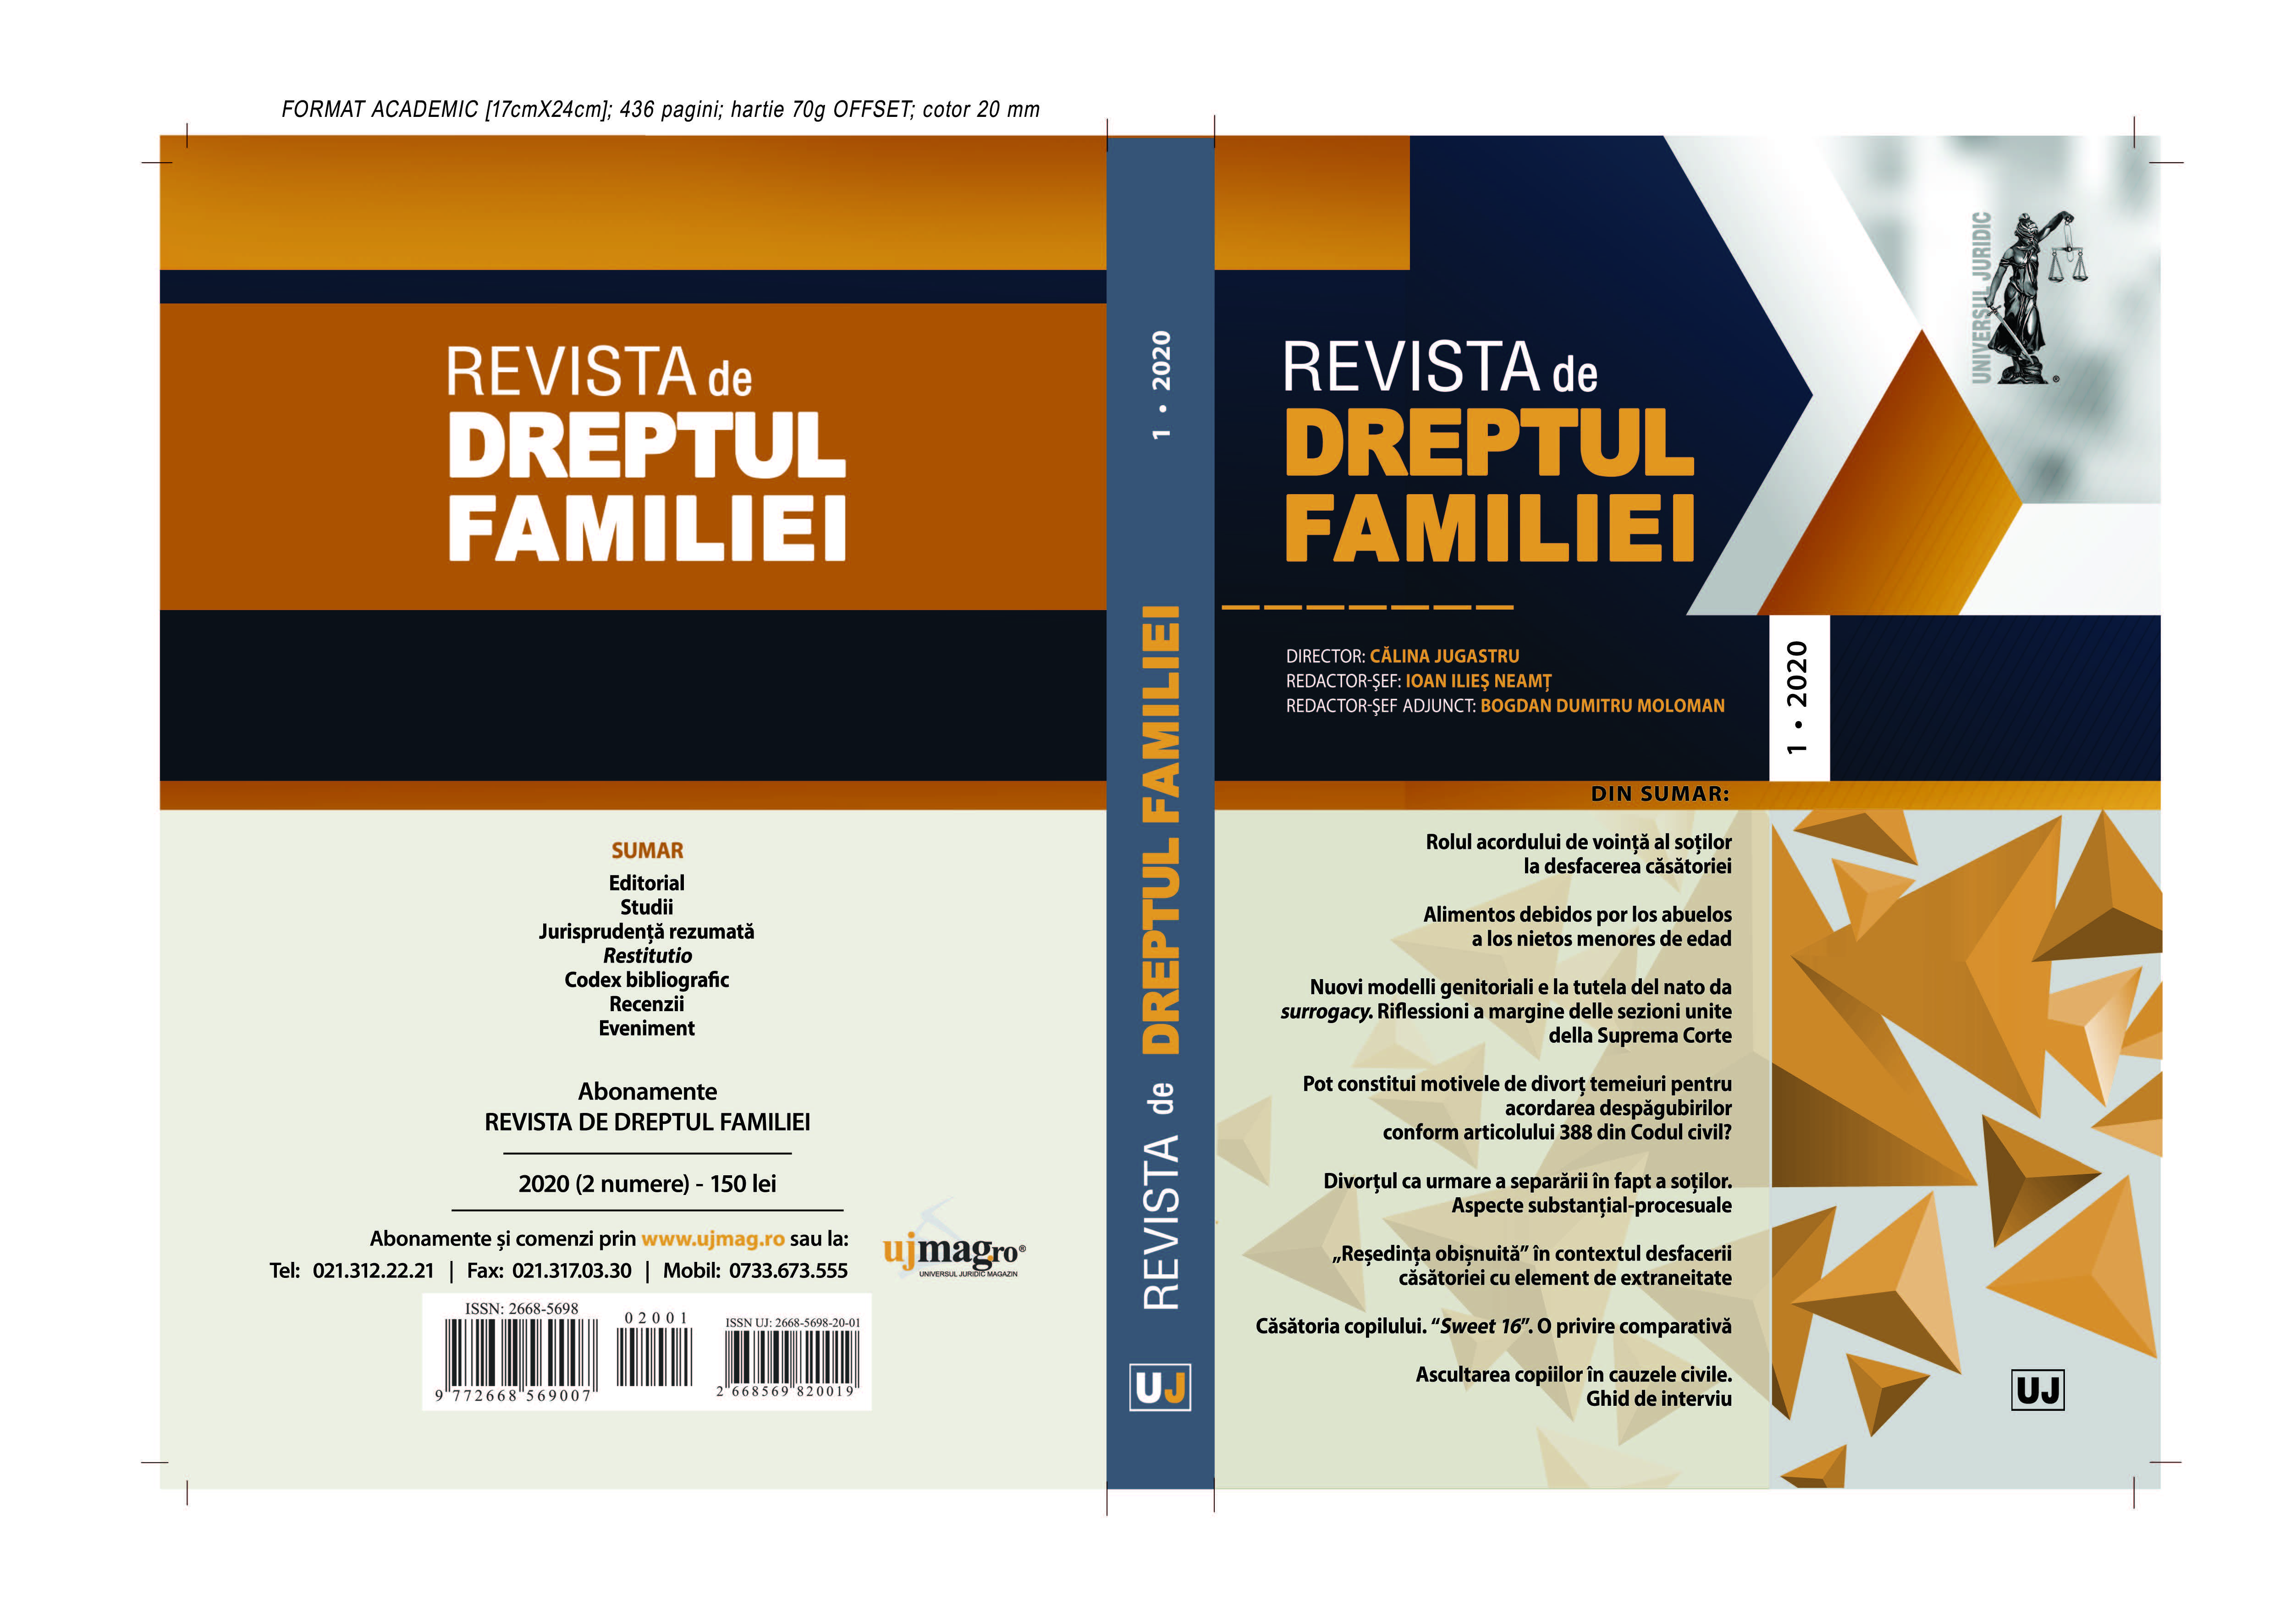 The abuse in the family law Cover Image